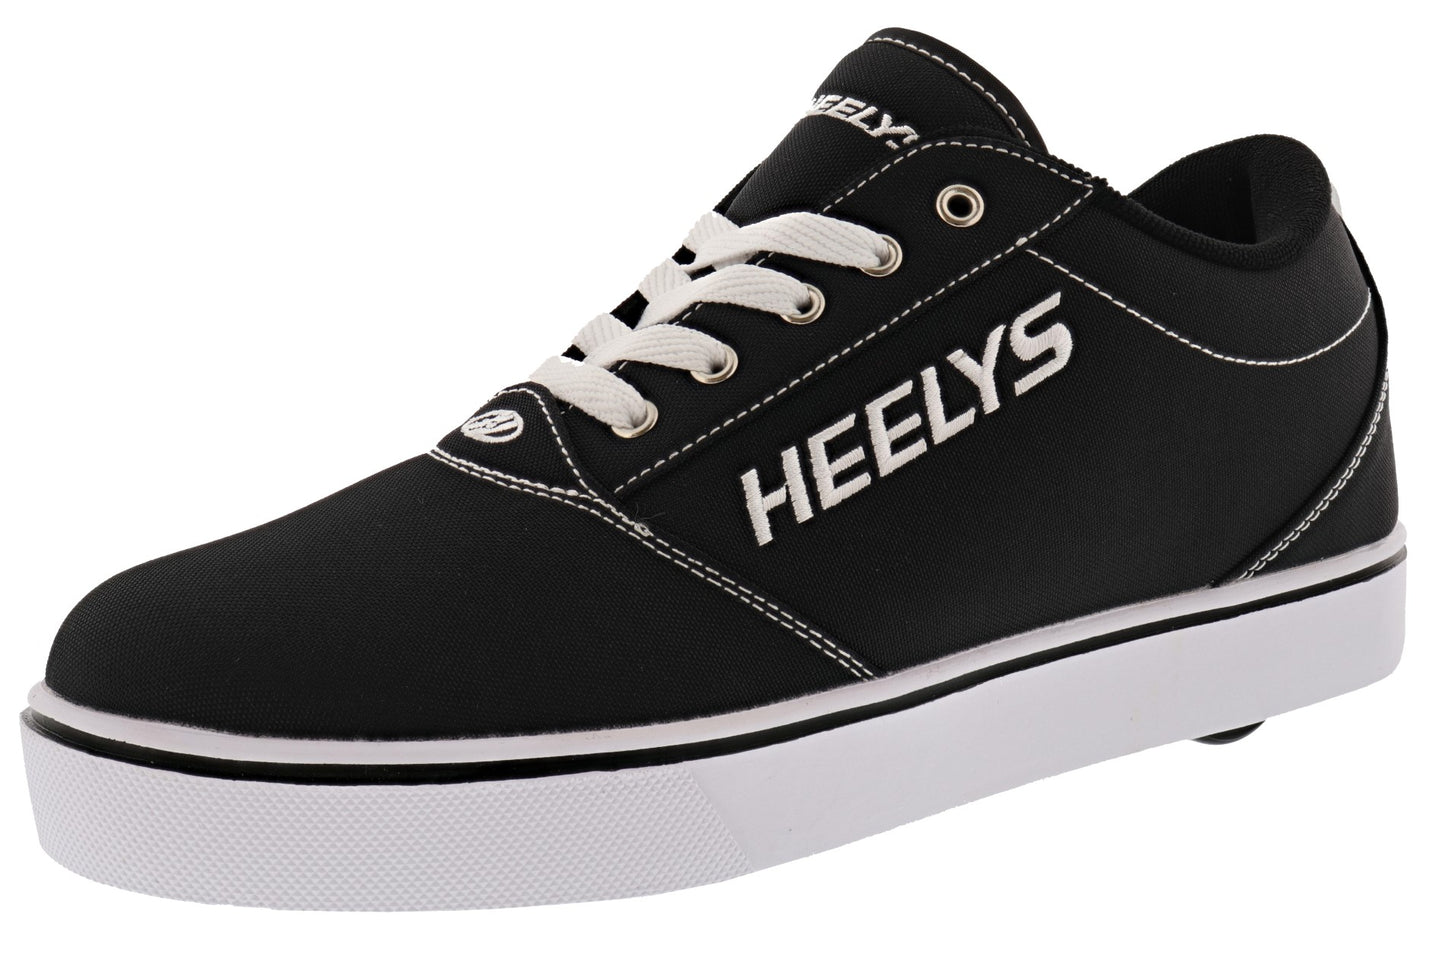 Skate Shoes with Wheels Online | Shoe